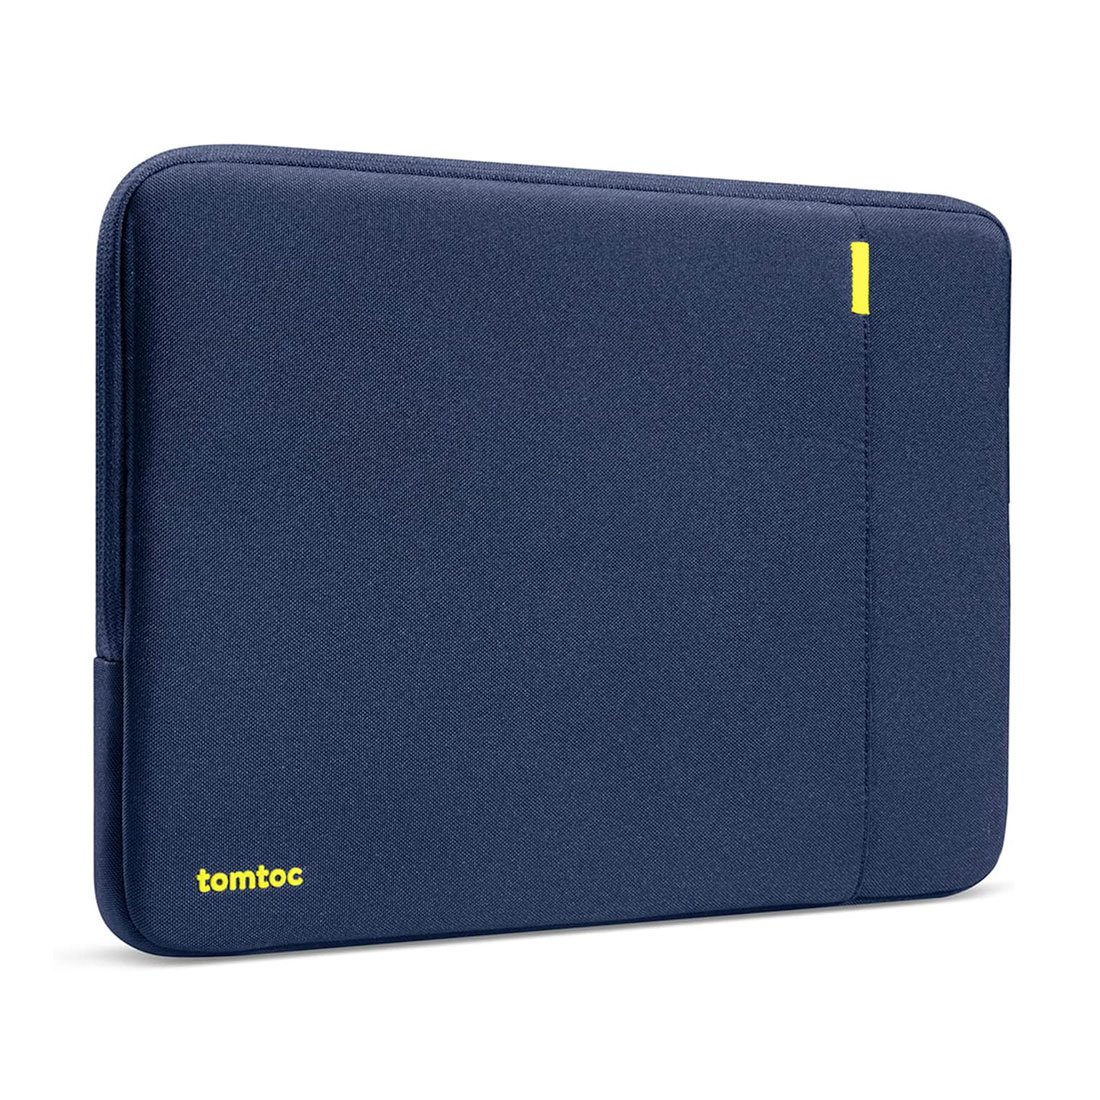 Tomtoc puzdro 360 Protective Sleeve pre Macbook Air/Pro 13